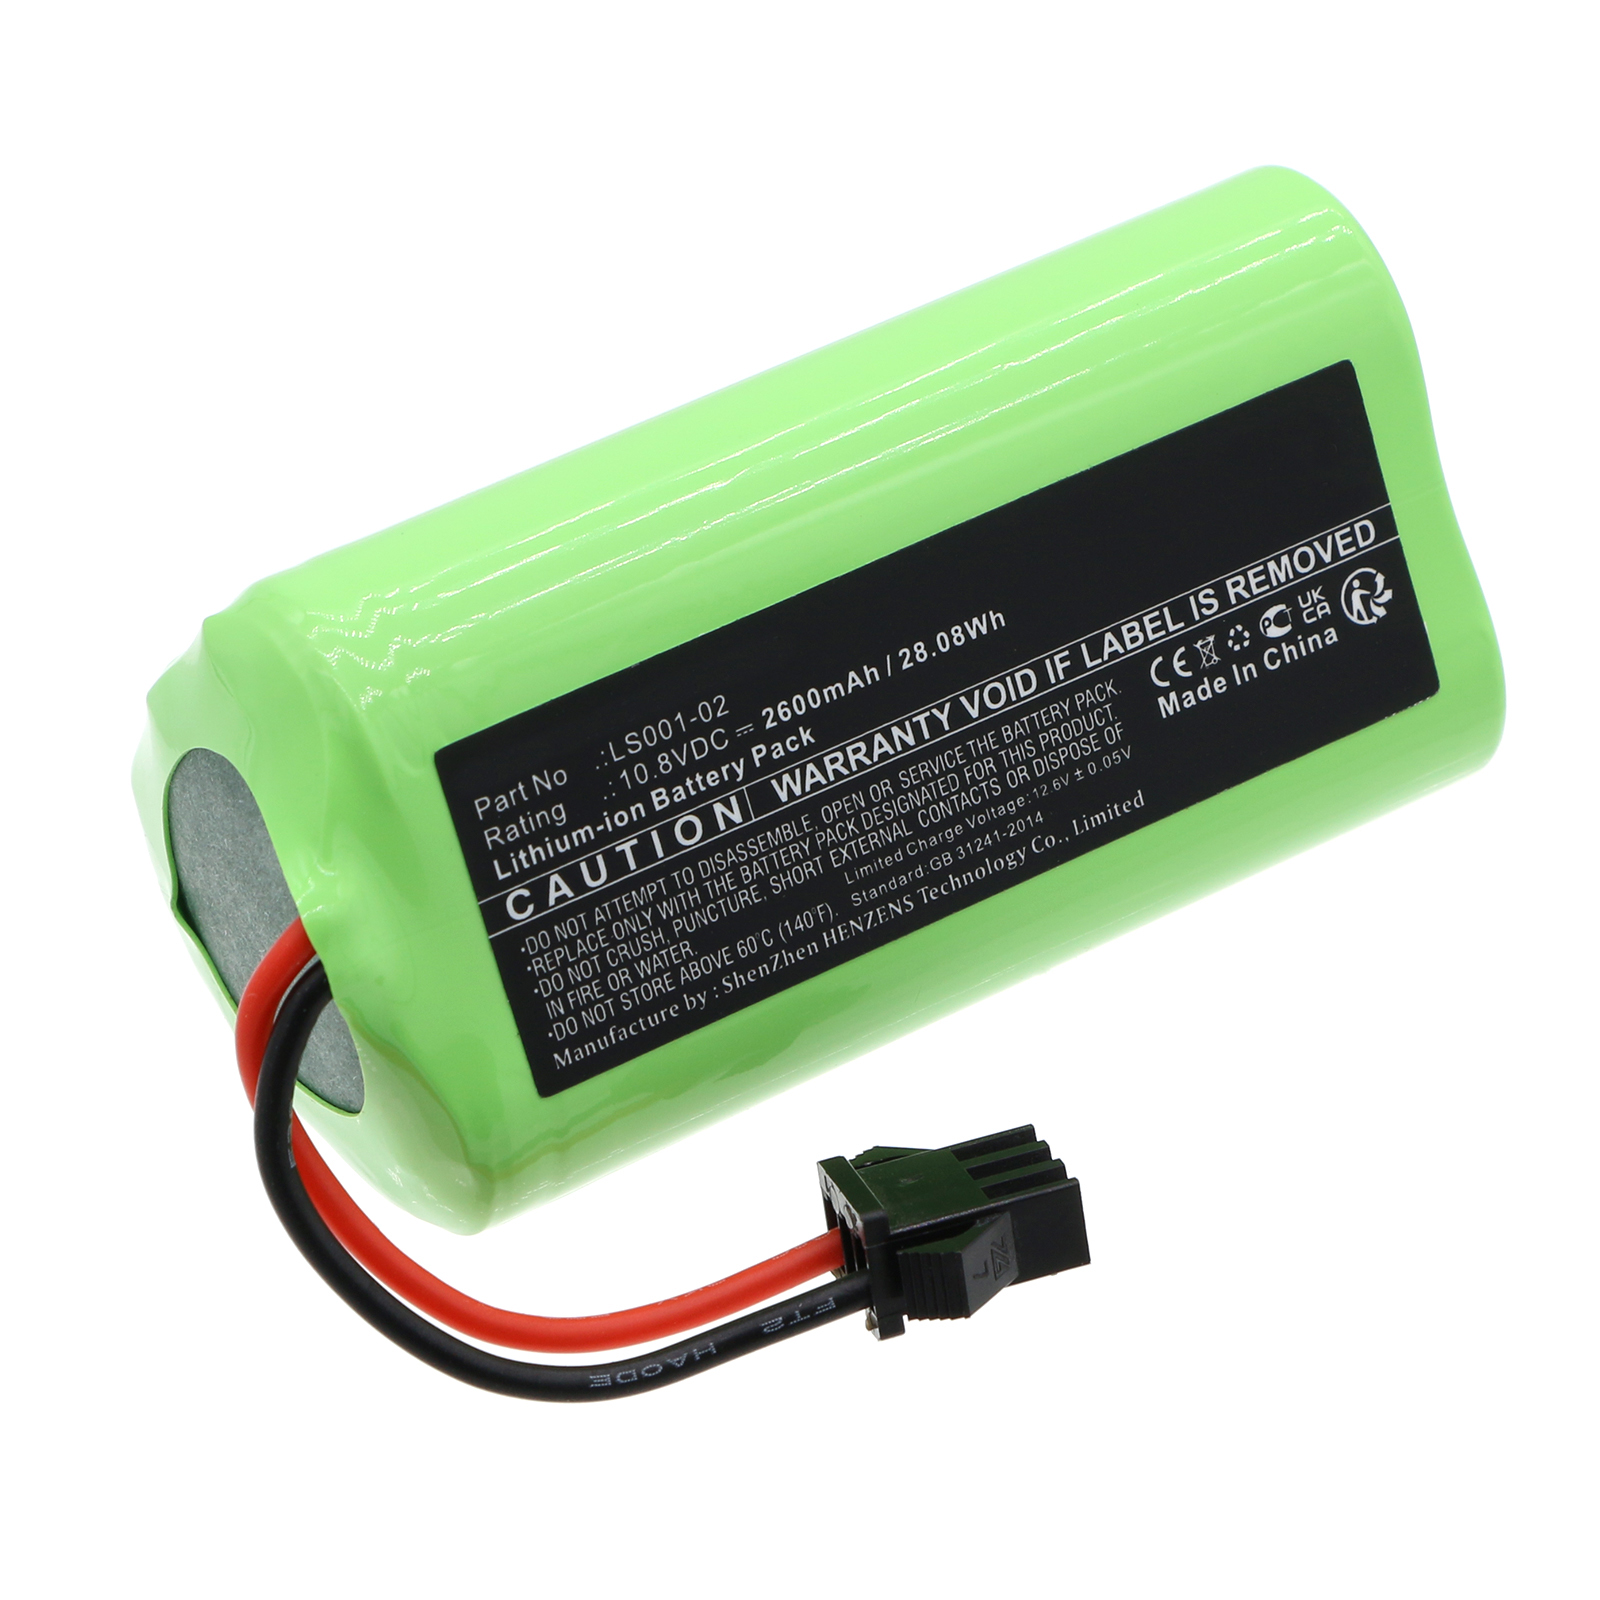 Batteries for VactidyVacuum Cleaner